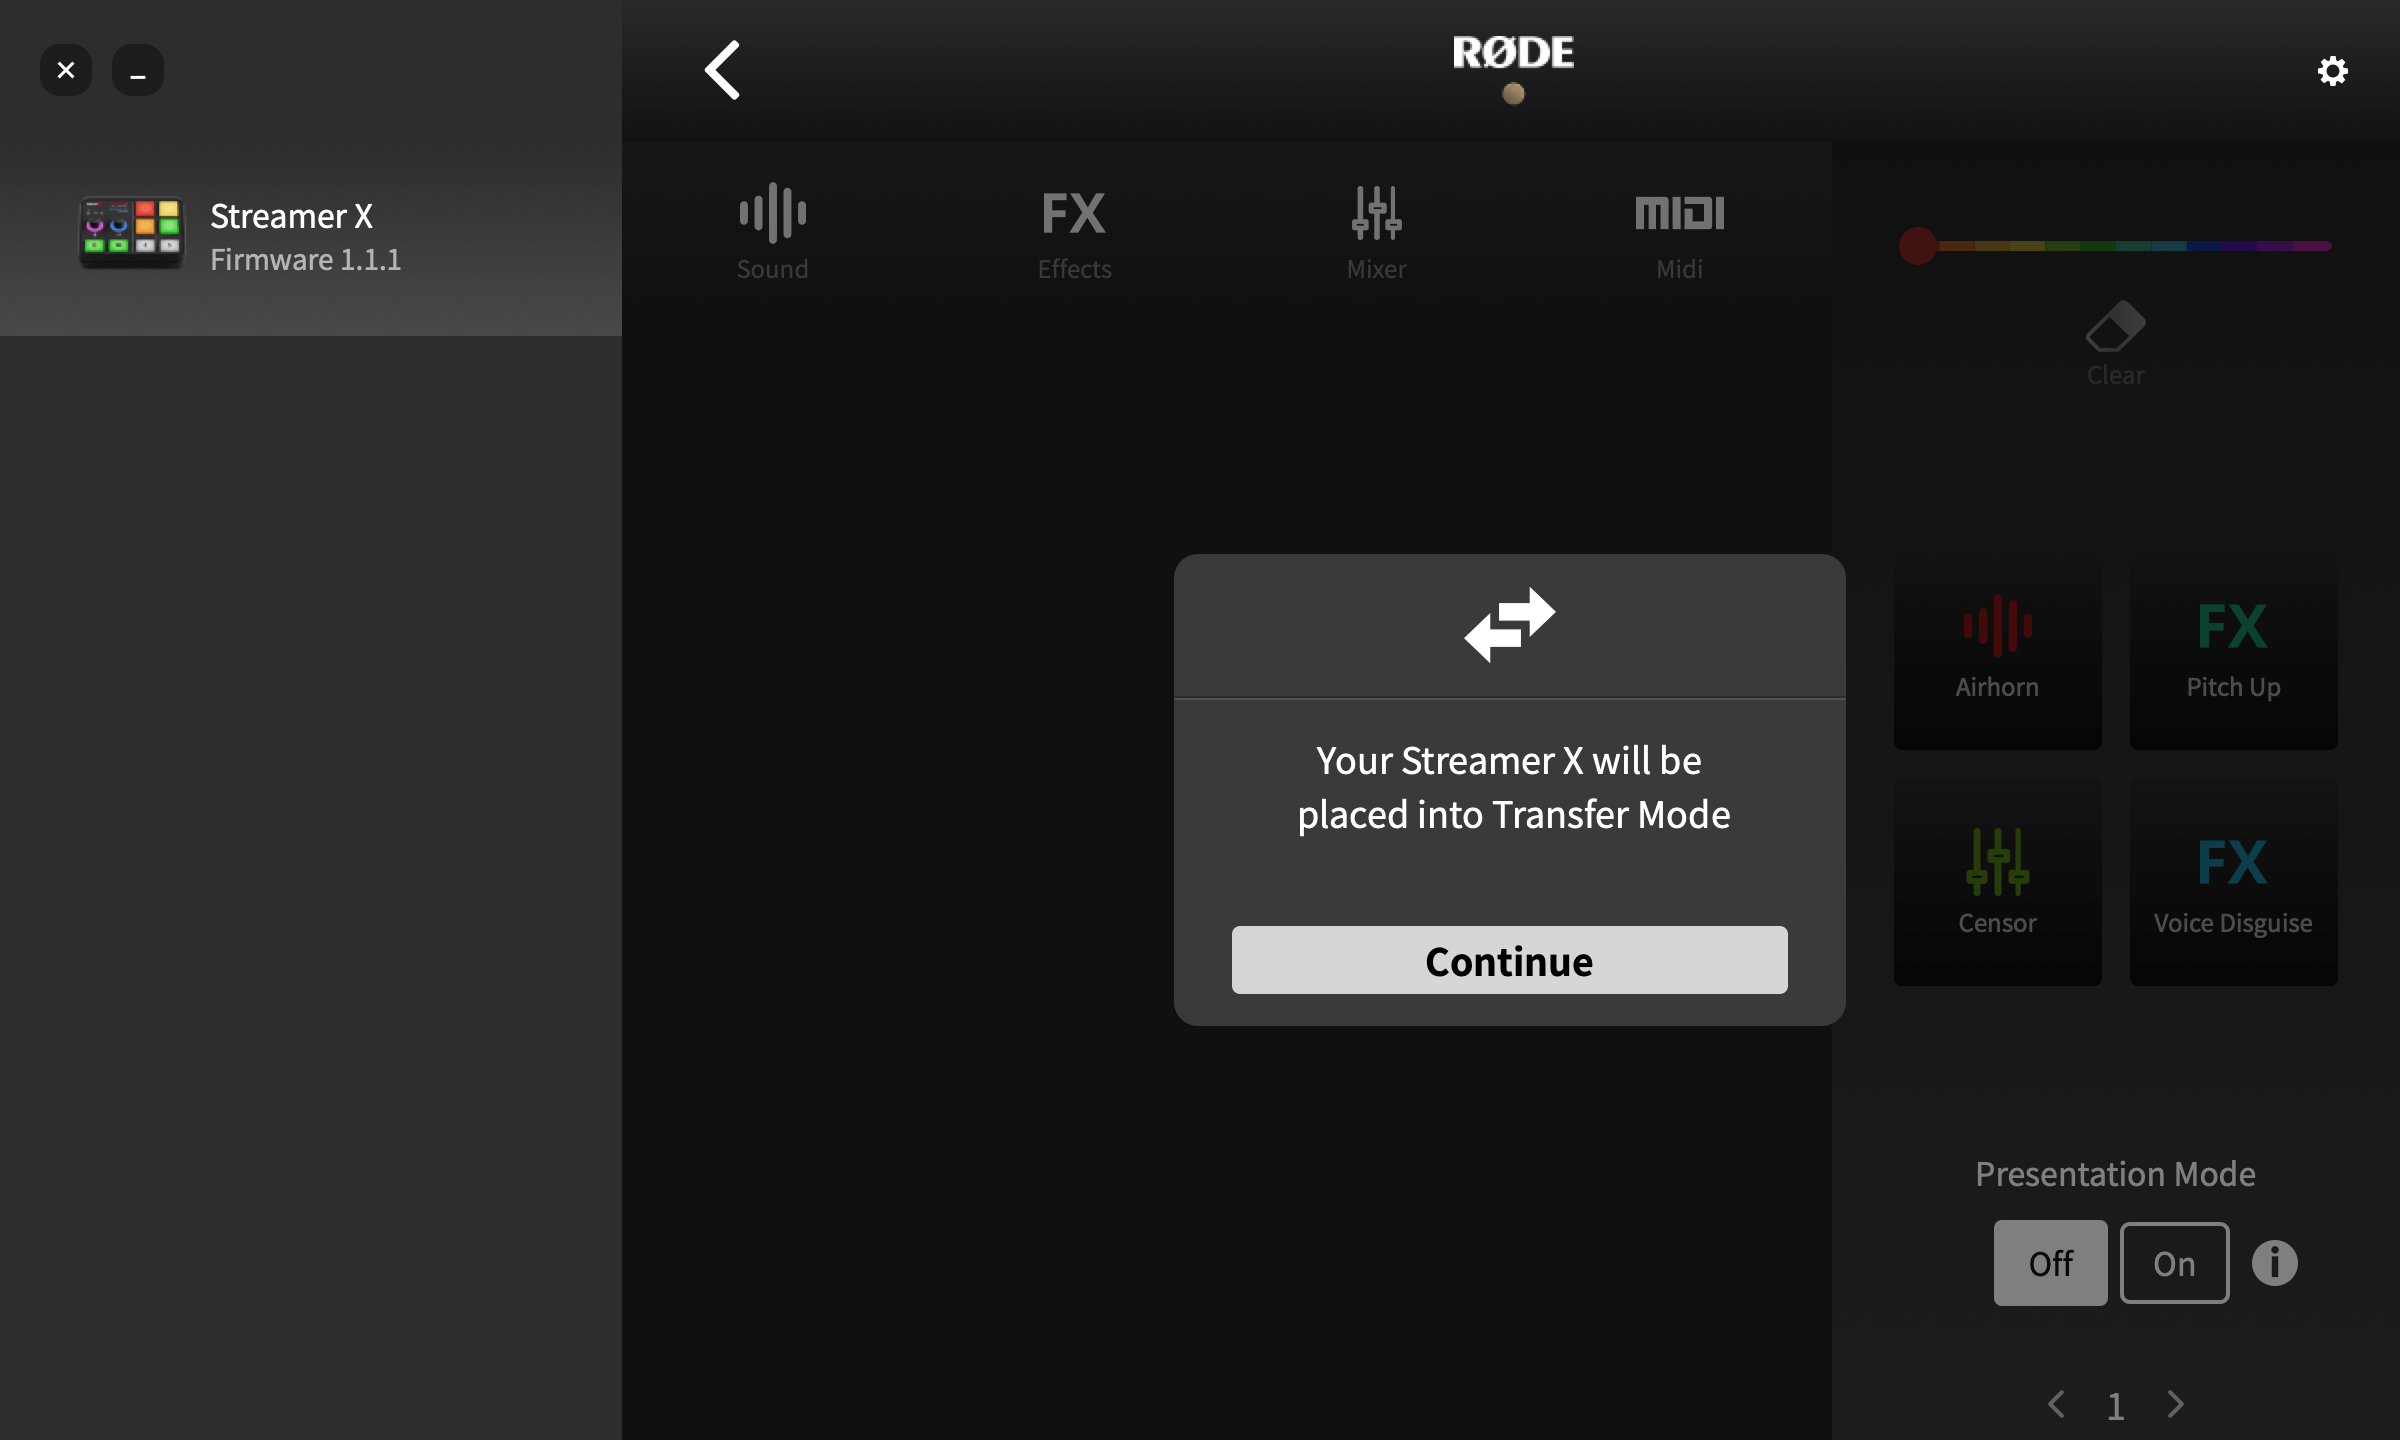 RØDE Central asking to place Streamer X in Transfer Mode